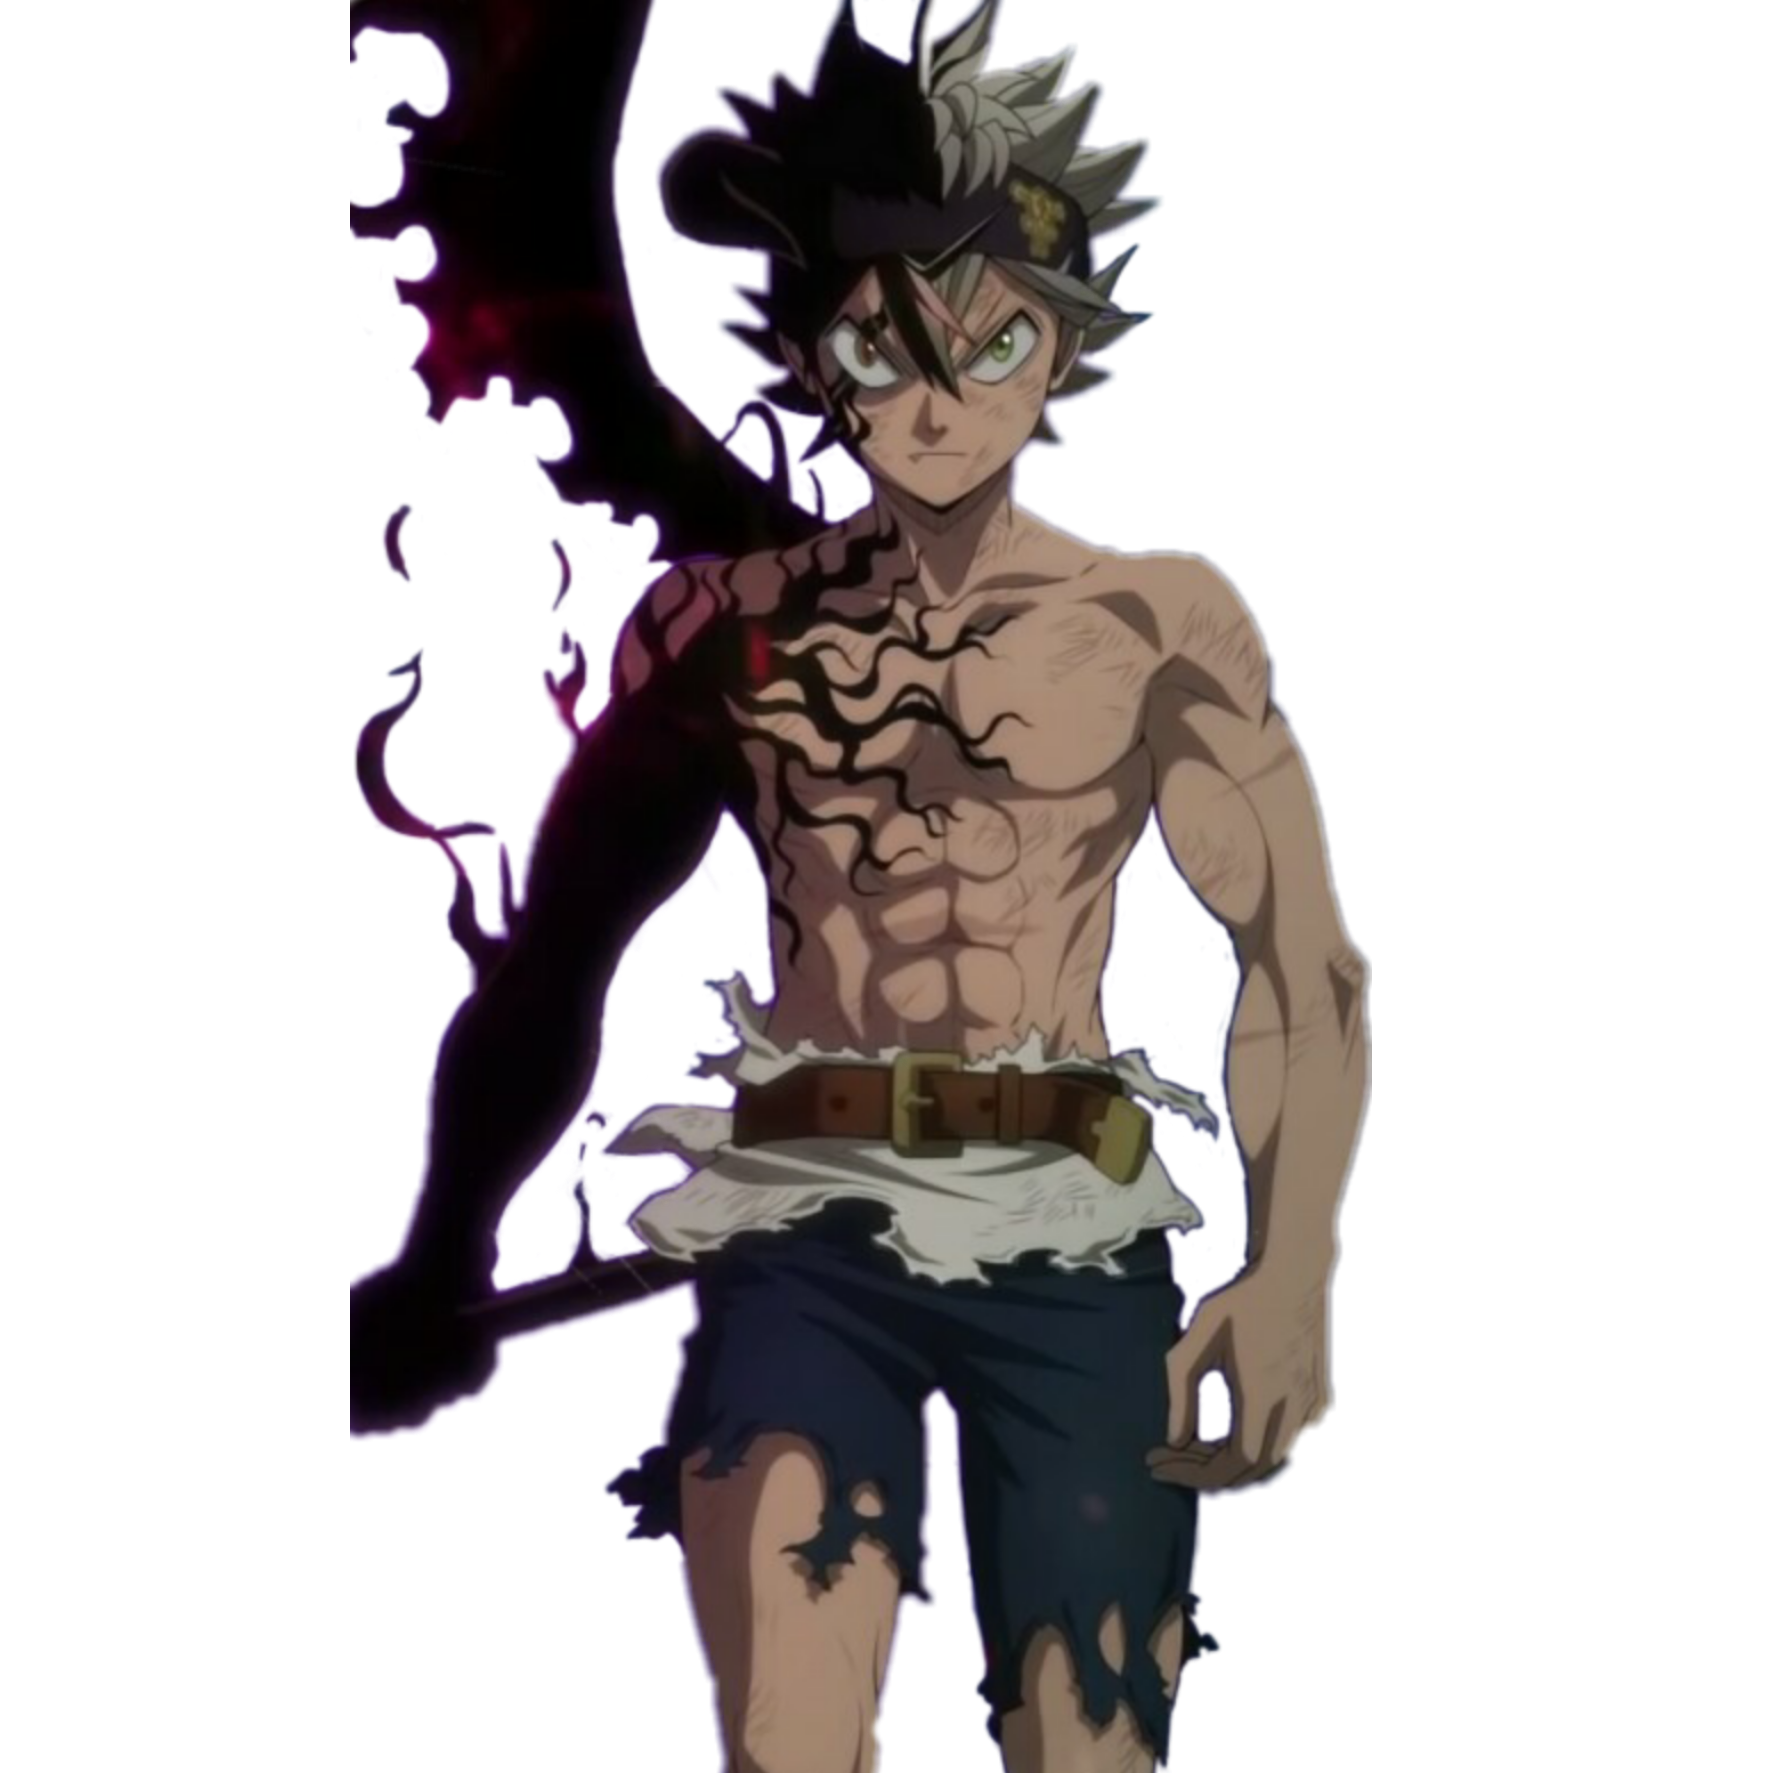 Asta Black Clover Png - Anime Wallpapers